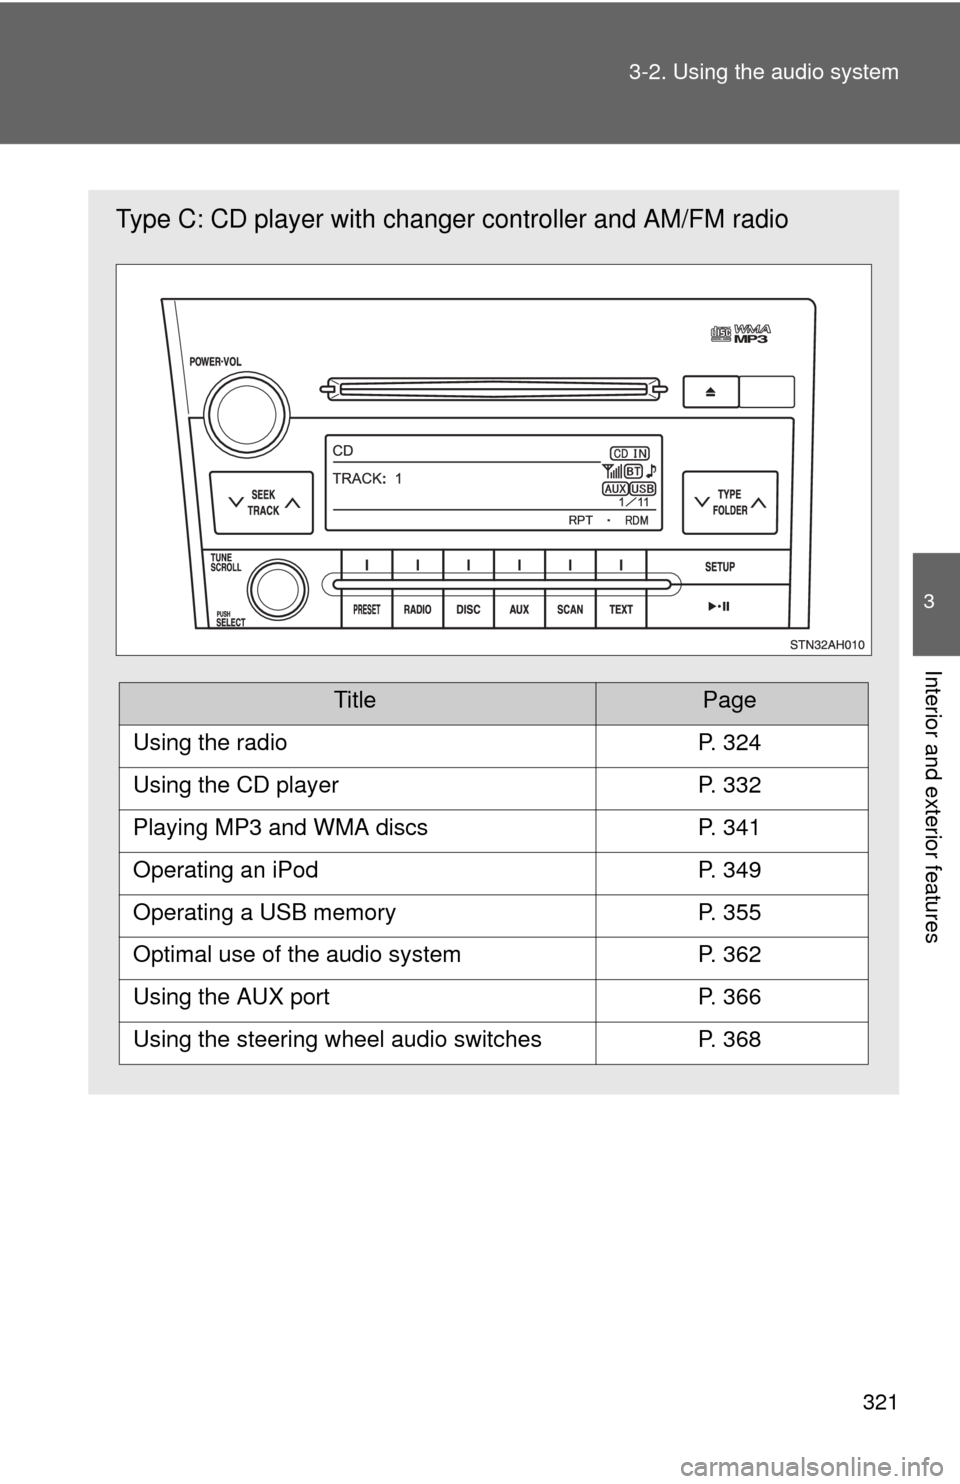 TOYOTA TUNDRA 2013 2.G Owners Manual 321
3-2. Using the audio system
3
Interior and exterior features
Type C: CD player with changer
 controller and AM/FM radio
TitlePage
Using the radioP. 324
Using the CD playerP. 332
Playing MP3 and WM